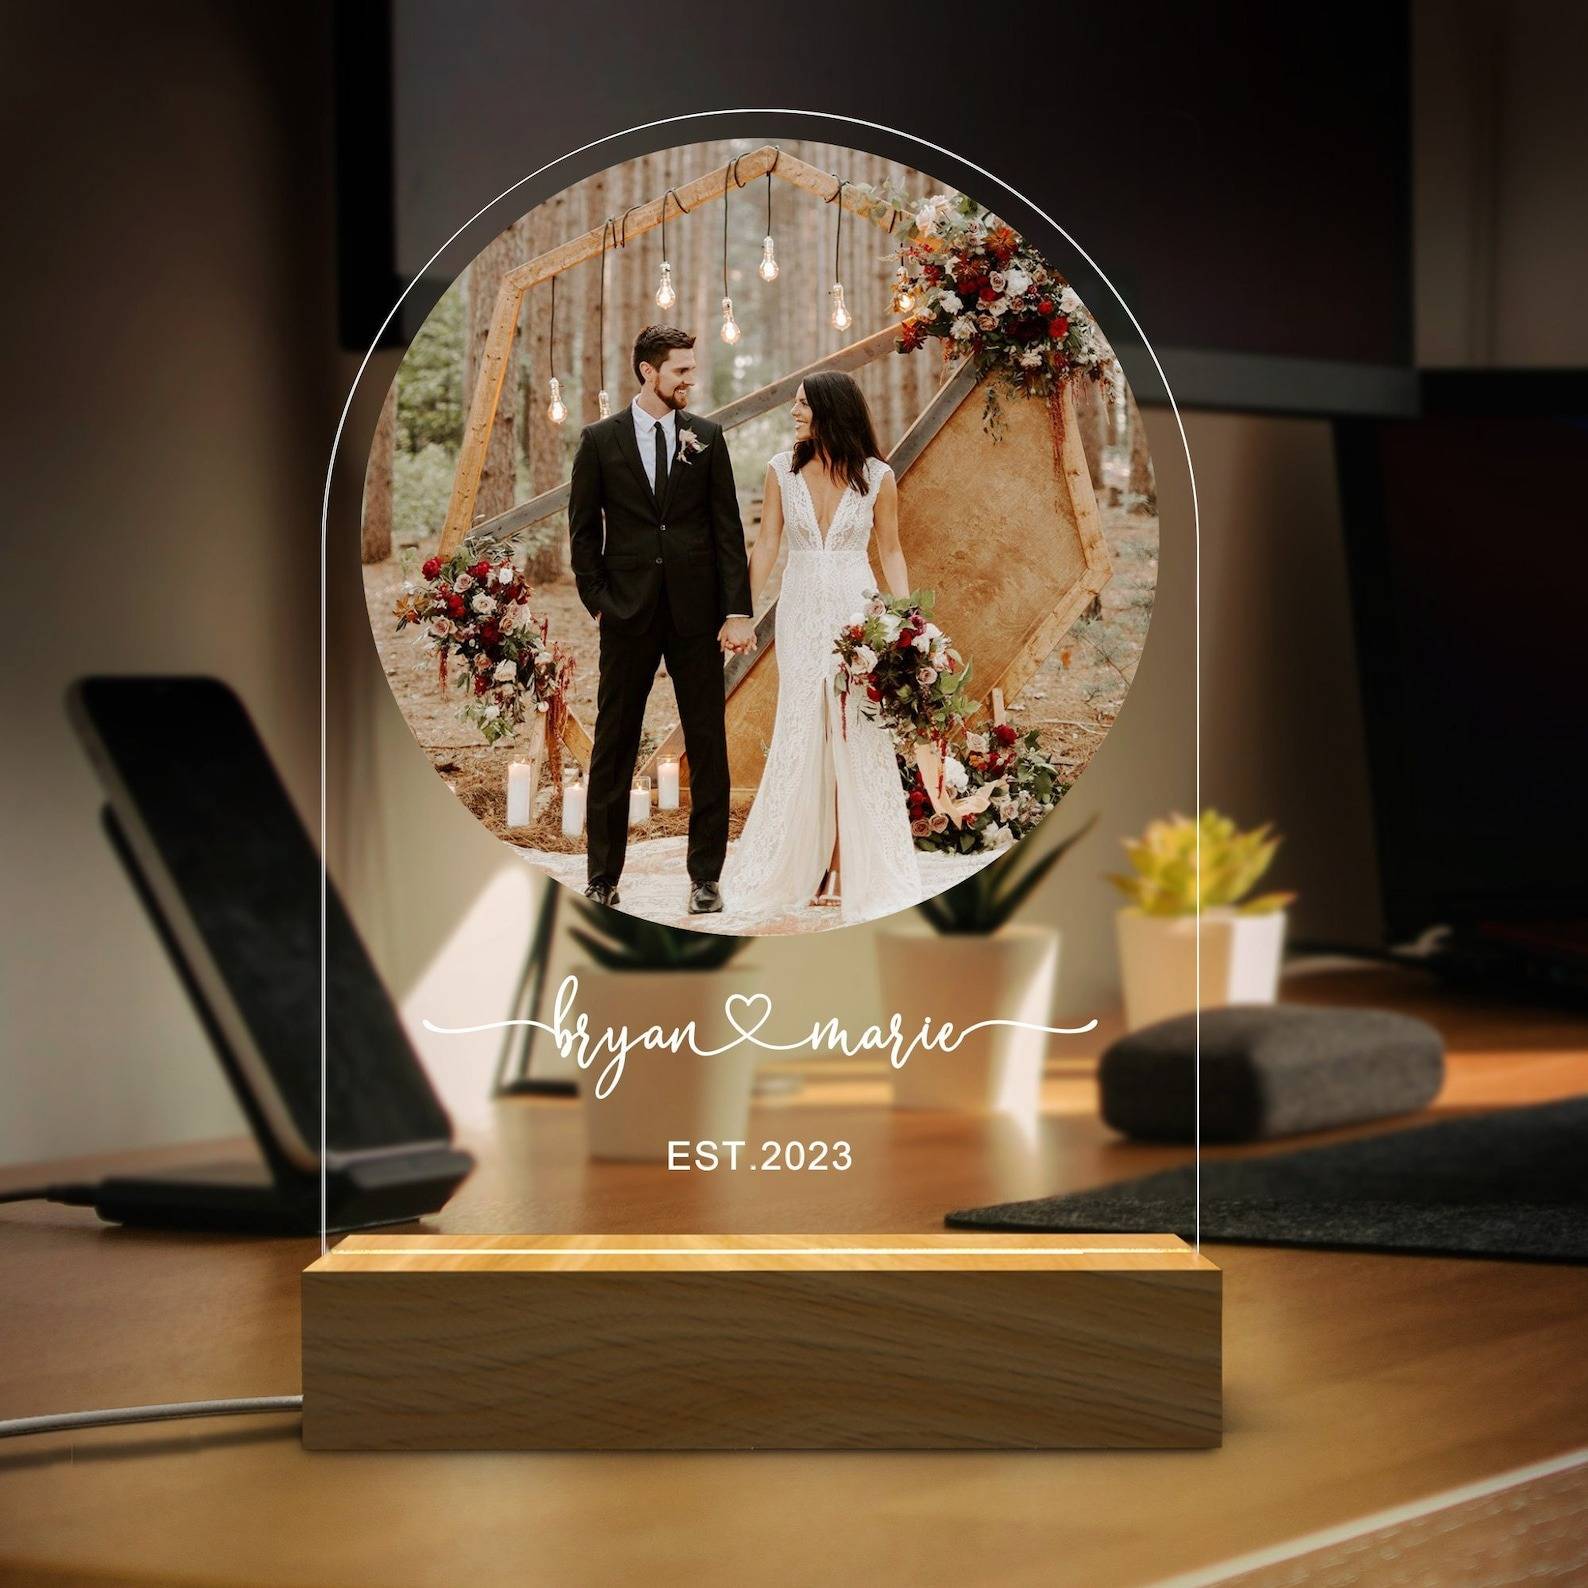 32 Best Personalized Wedding Gifts 2022 | HGTV